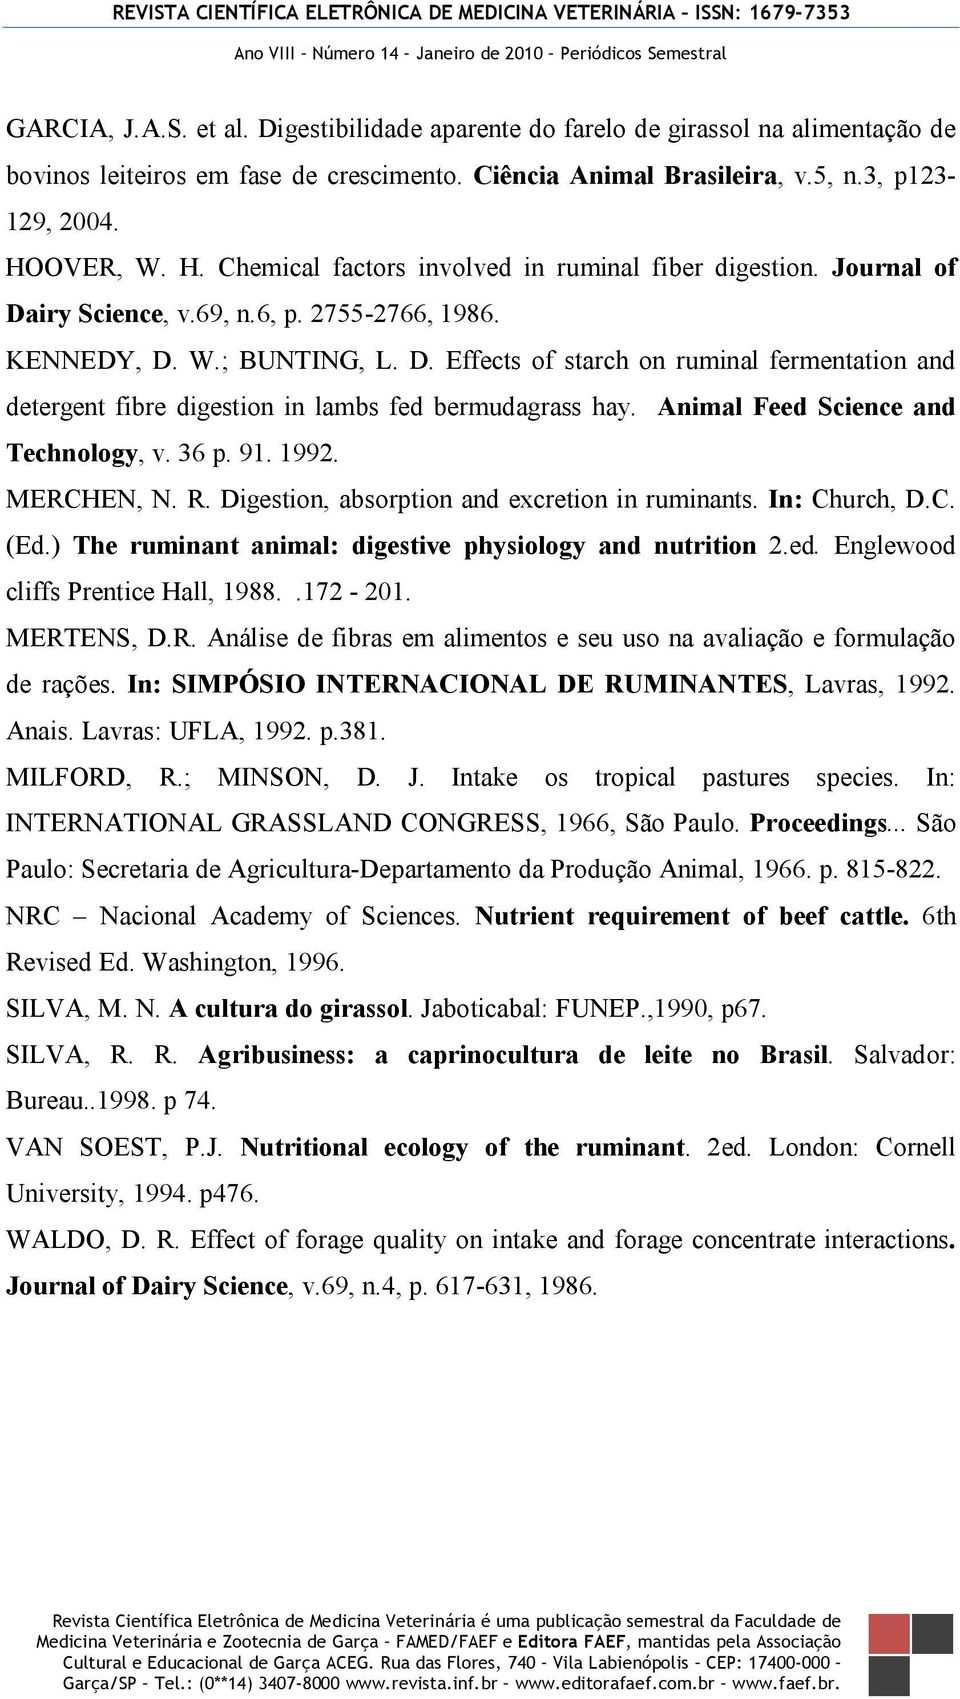 Animal Feed Science and Technology, v. 36 p. 91. 1992. MERCHEN, N. R. Digestion, absorption and excretion in ruminants. In: Church, D.C. (Ed.